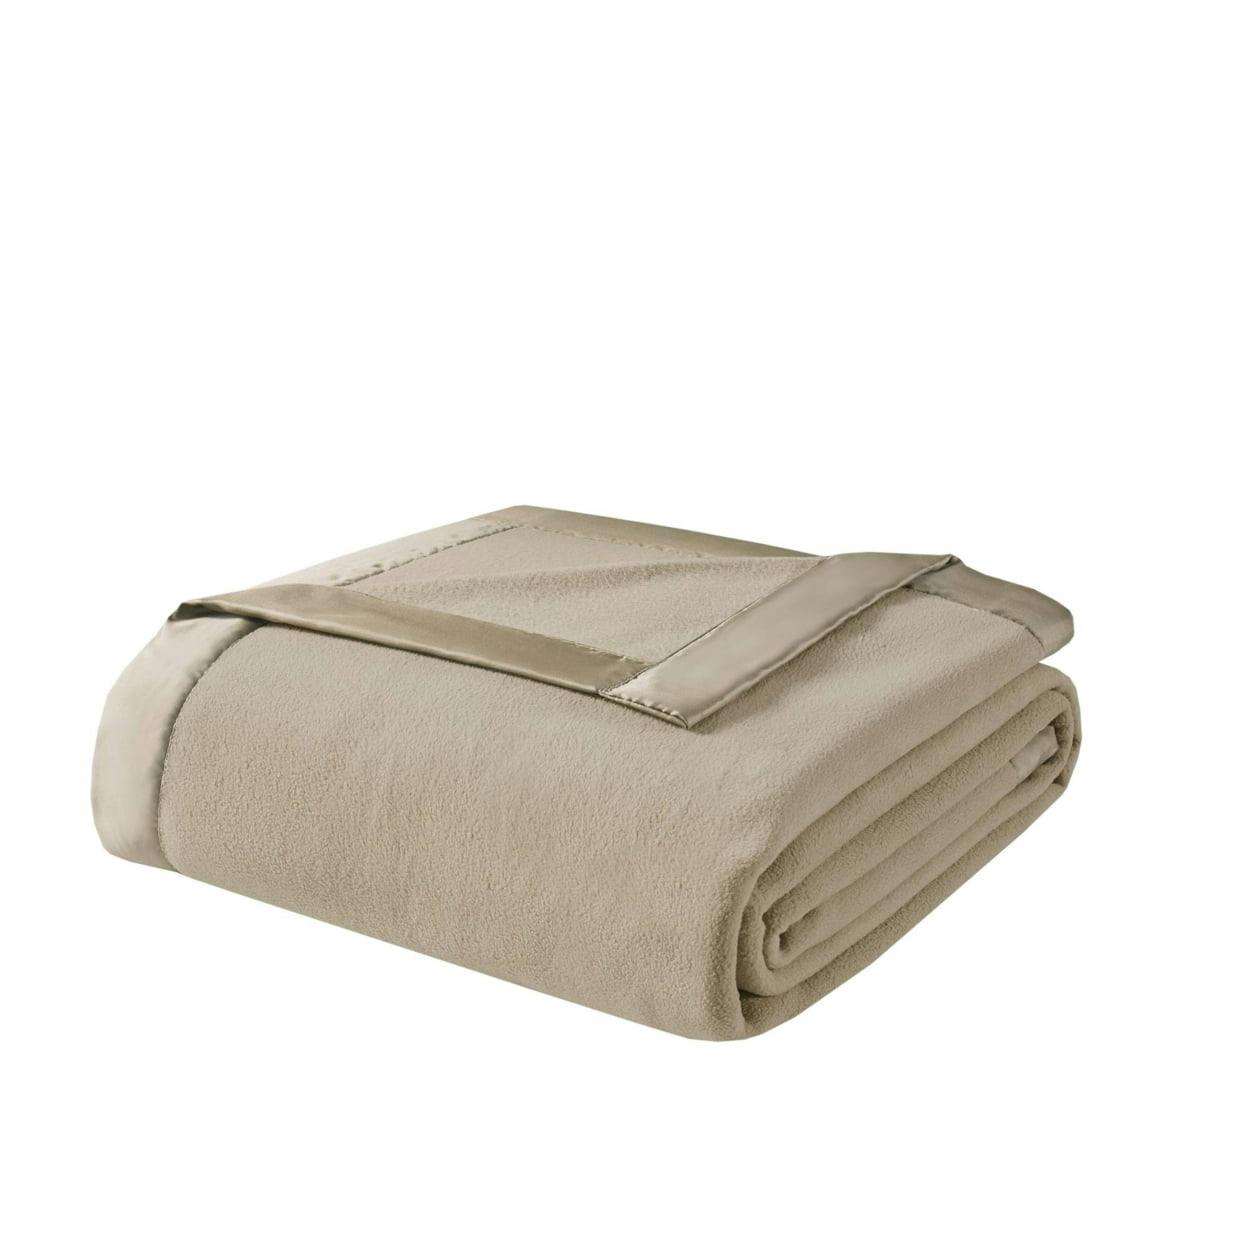 Luxurious Twin-Size Reversible Microfleece Blanket in Natural